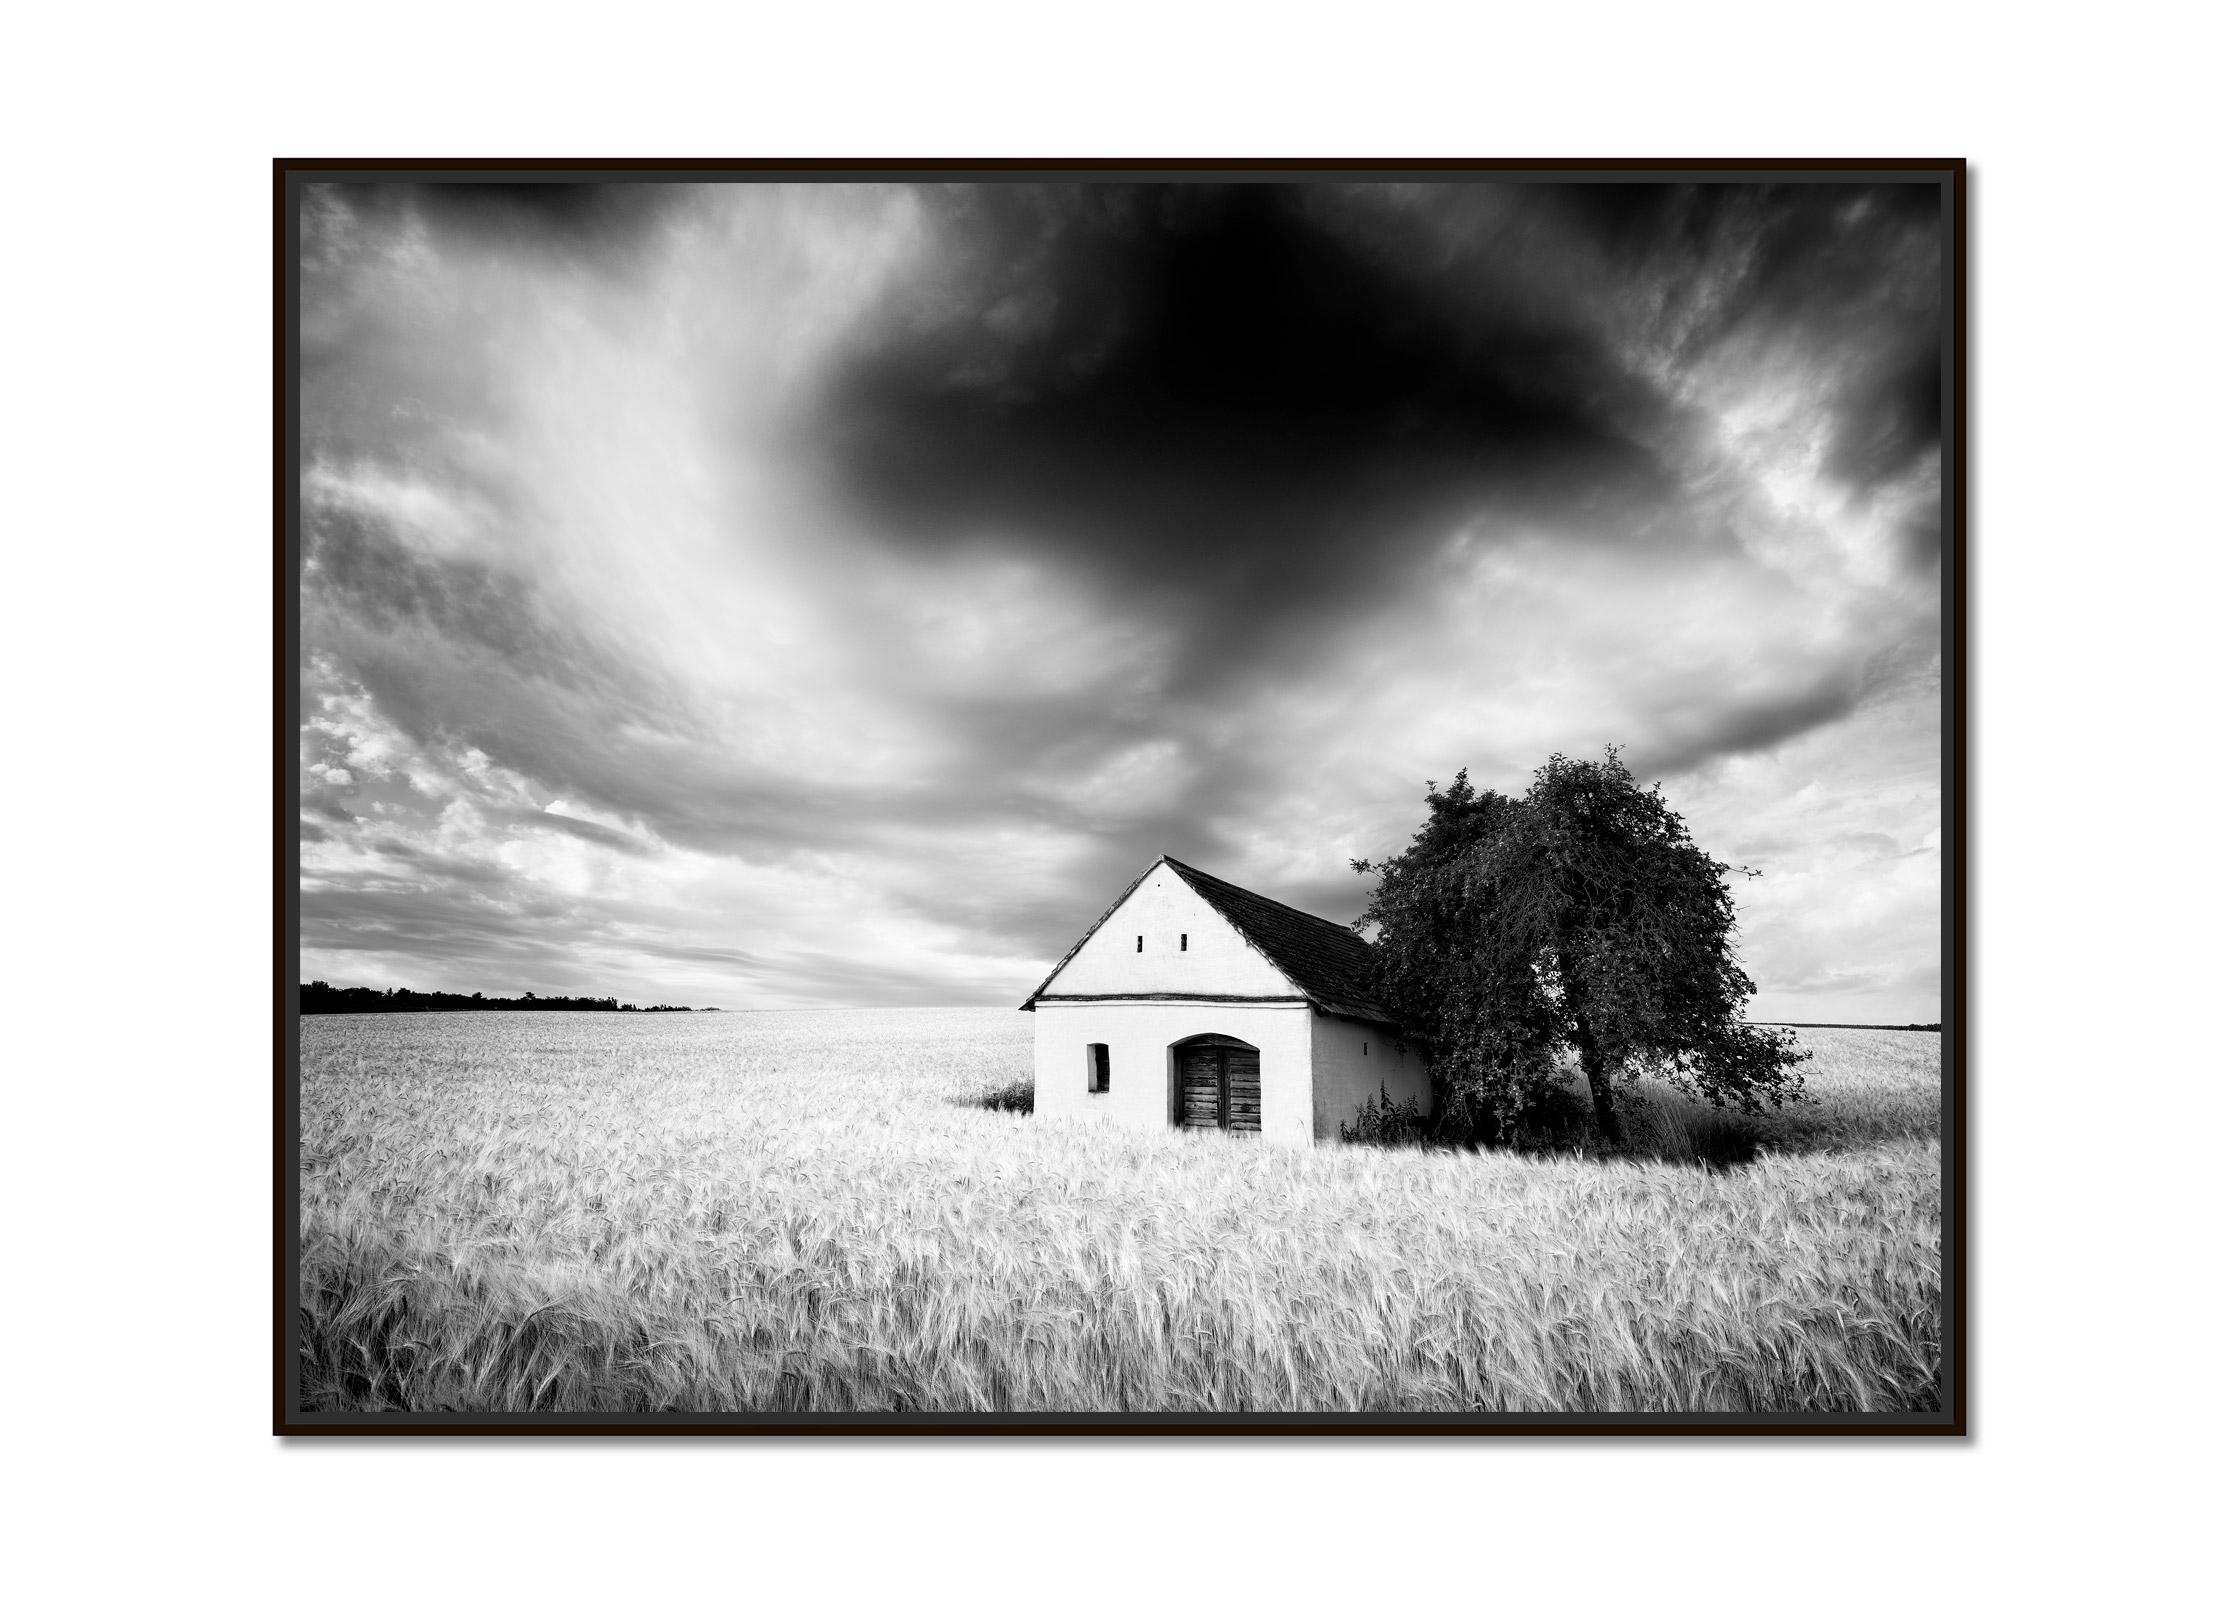 Wine Press House, wheat field, heavy cloud, black & white landscape photography - Photograph by Gerald Berghammer